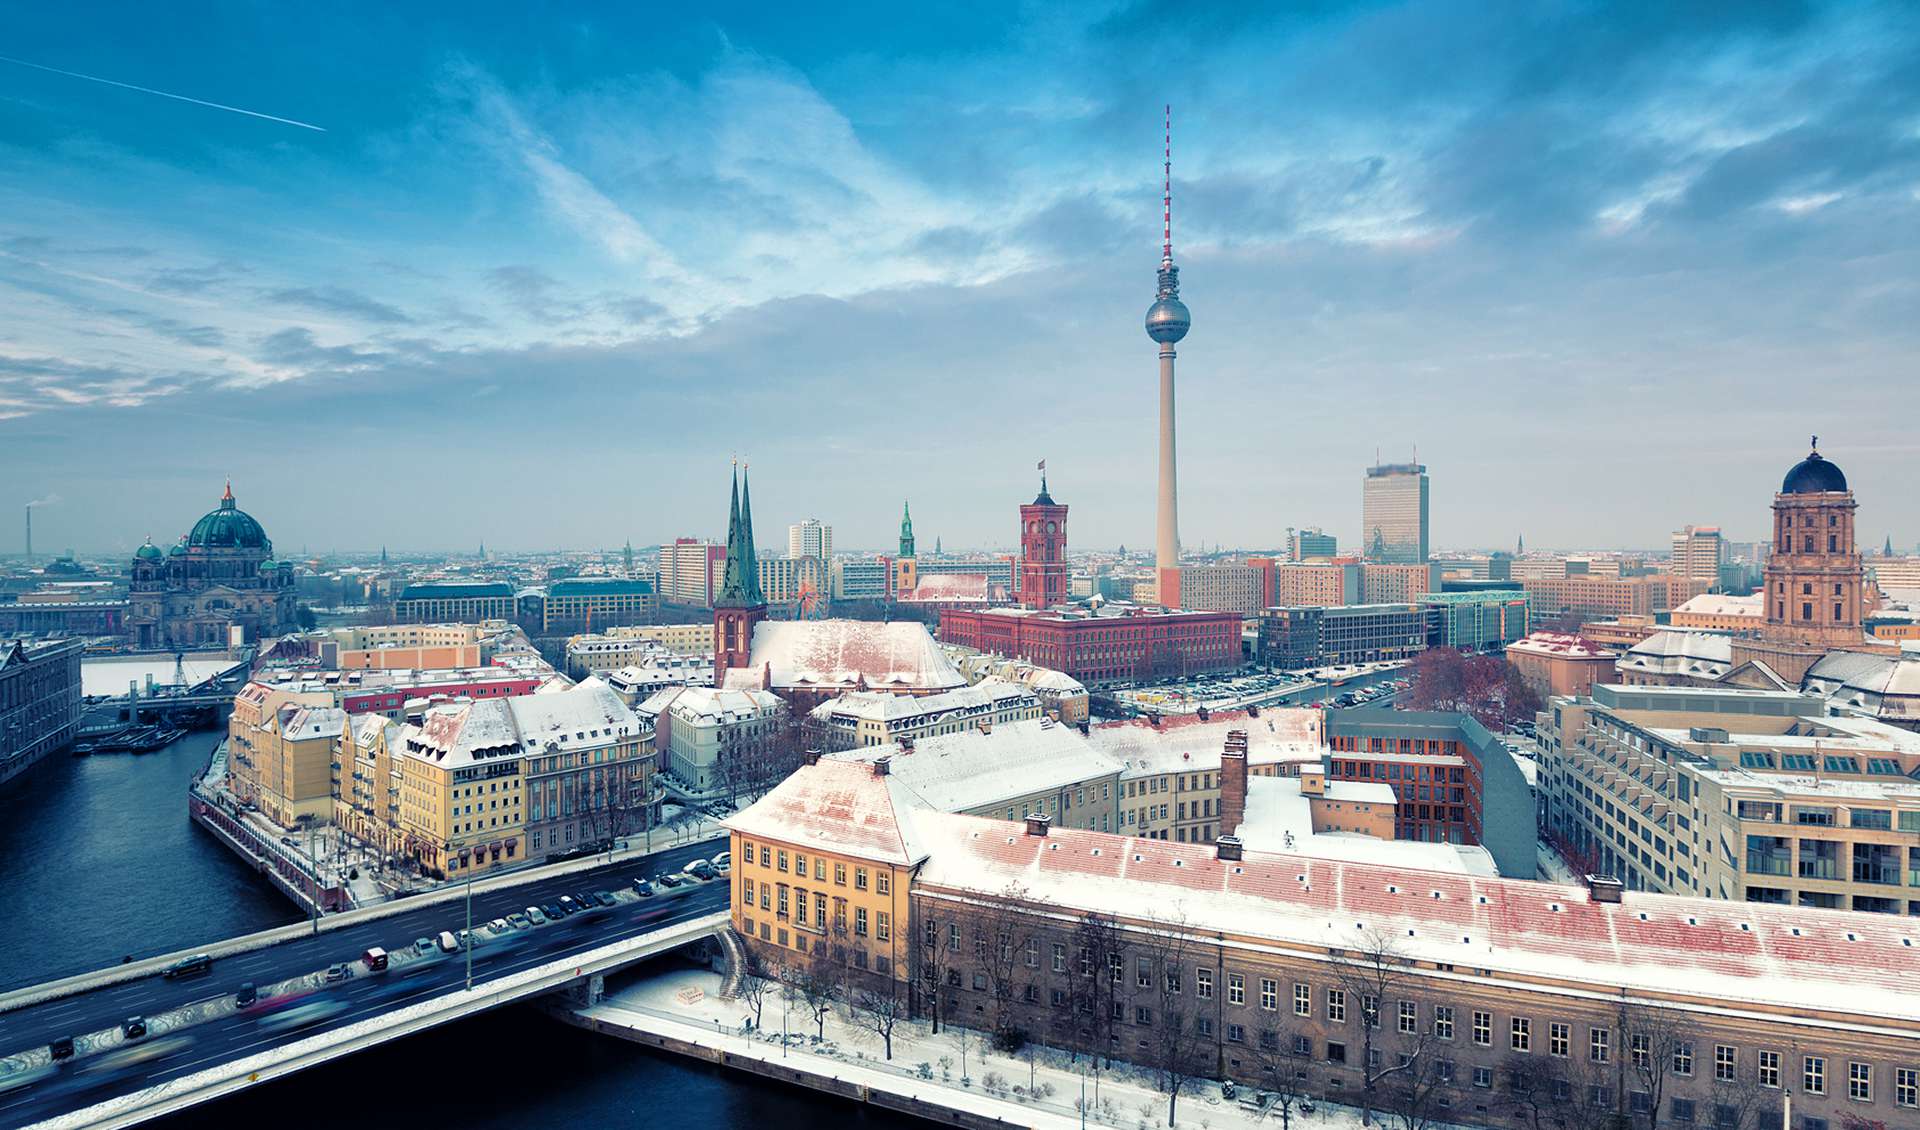 Berlin in December: The Hustle and Bustle of Christmas Markets